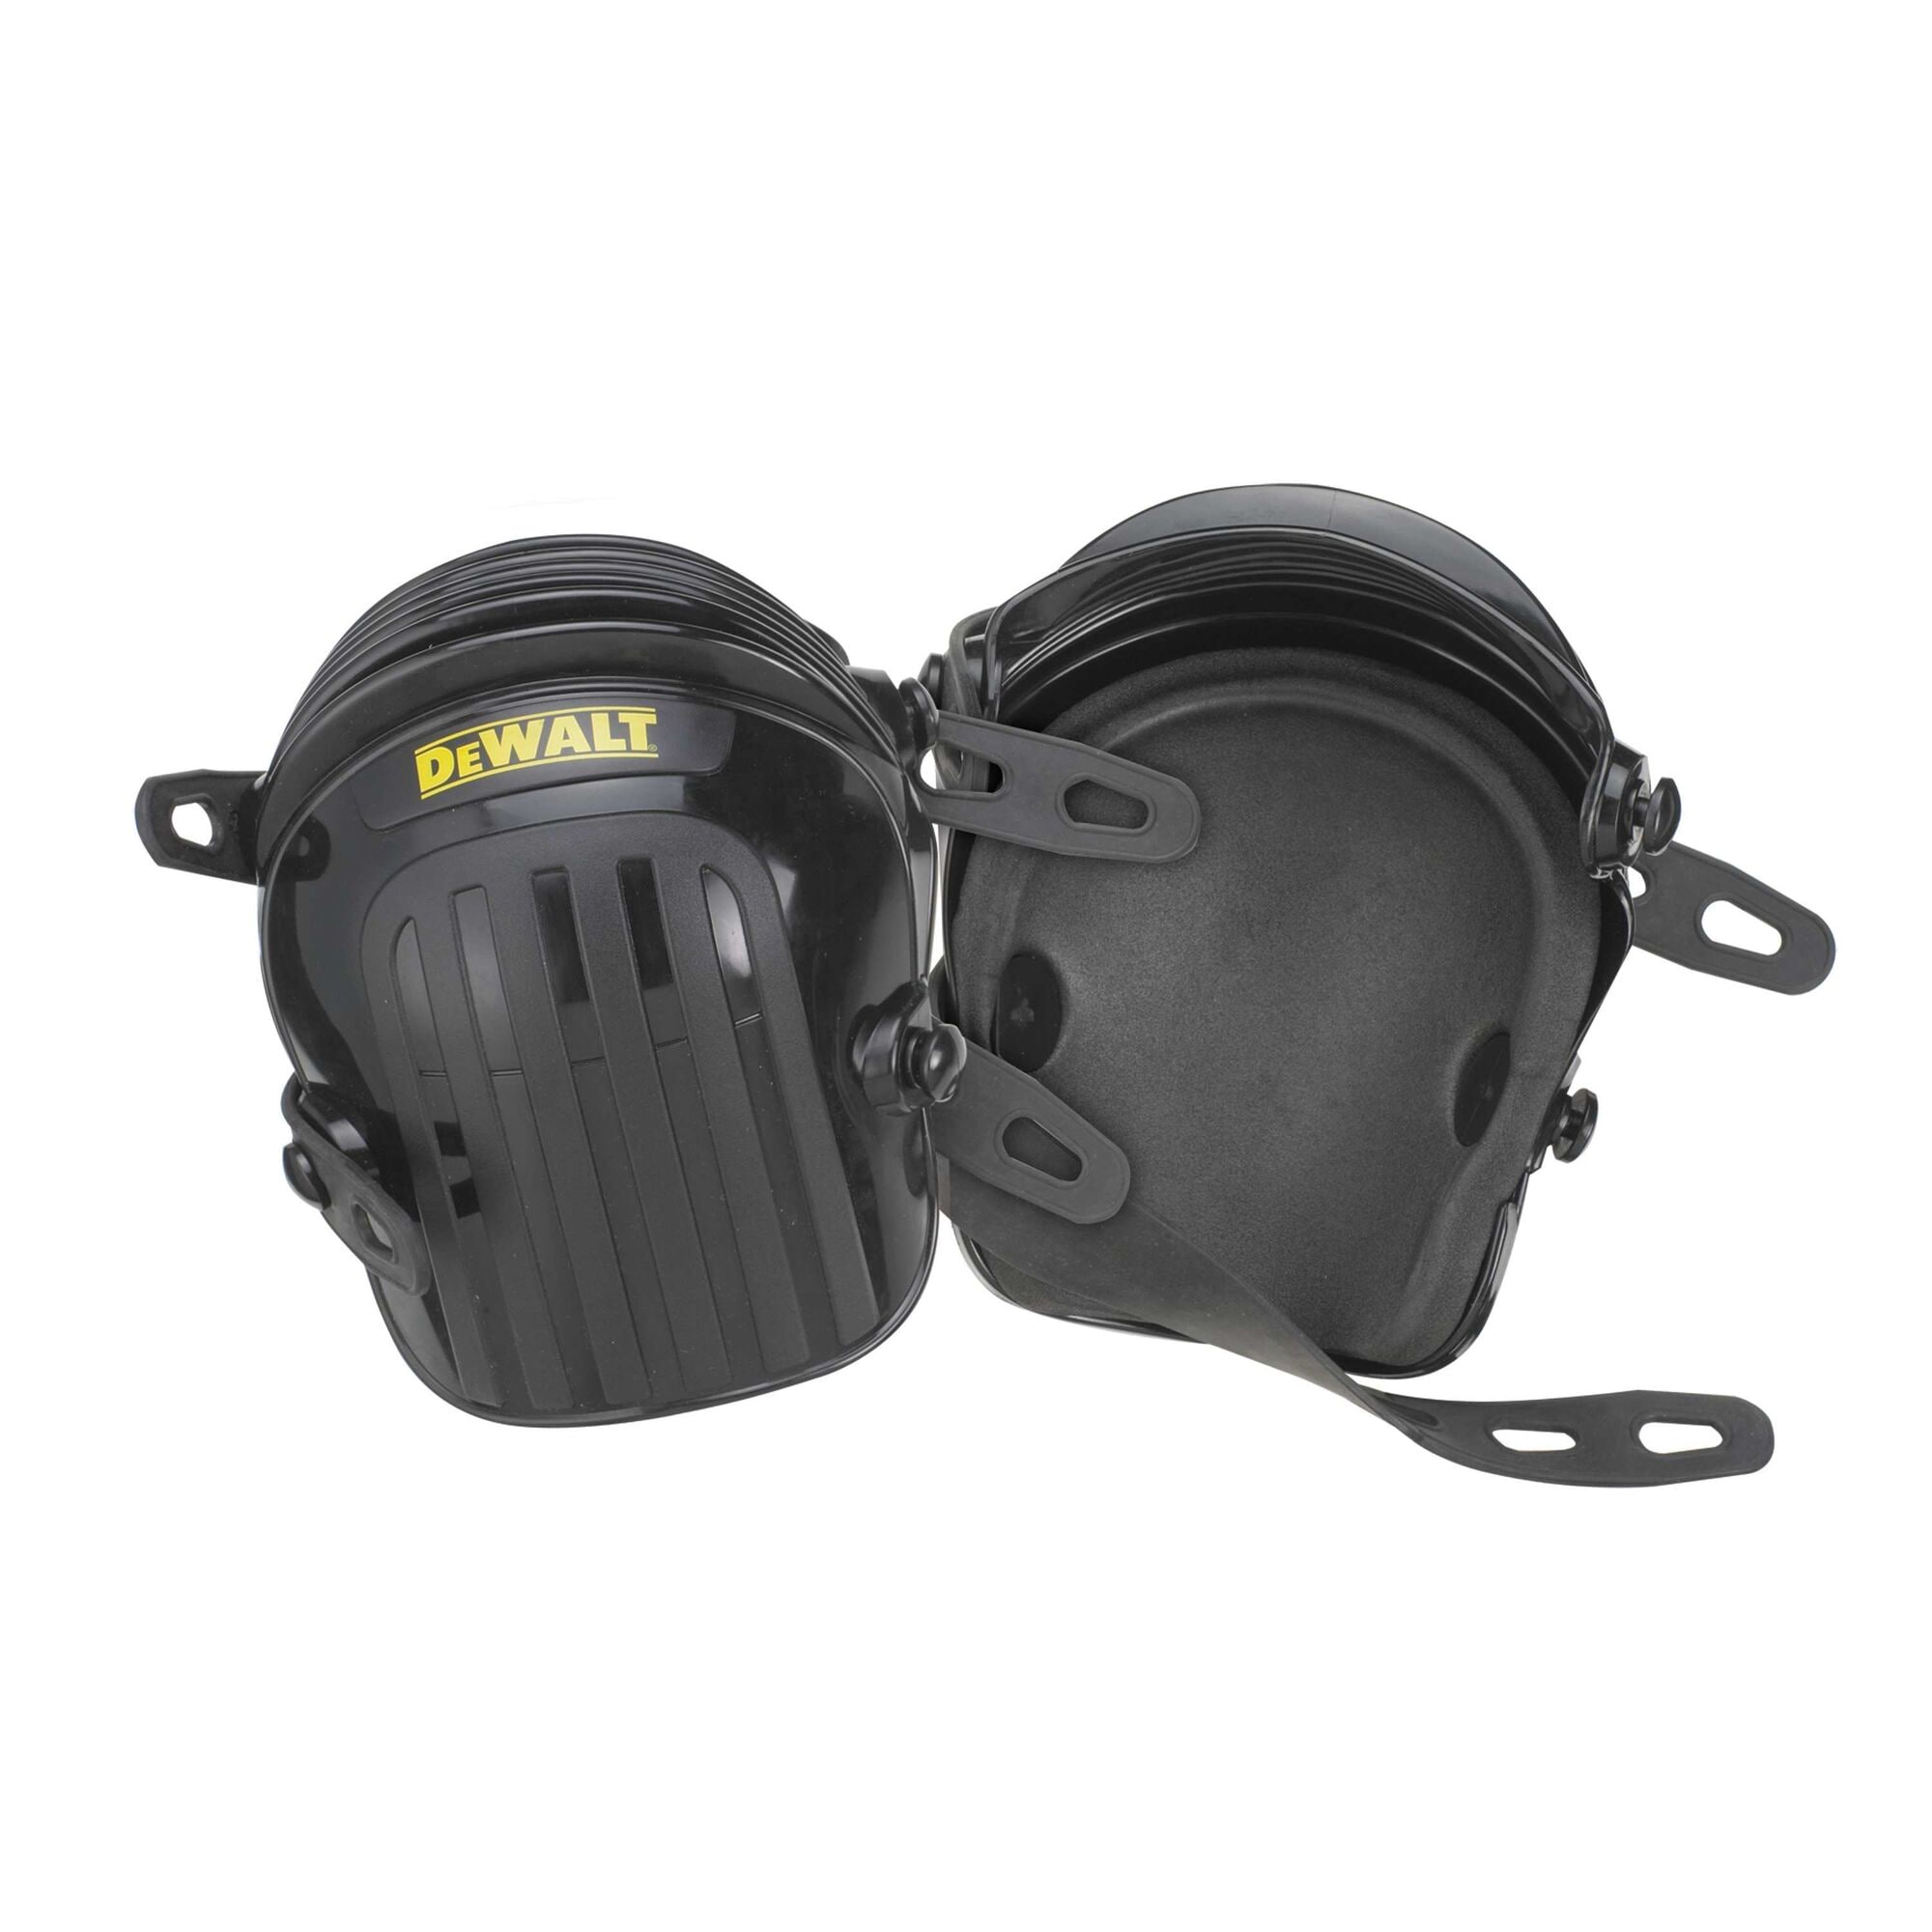 All DEWALT DG5217 All-Terrain Kneepads with Layered Gel Padding with Full Size 